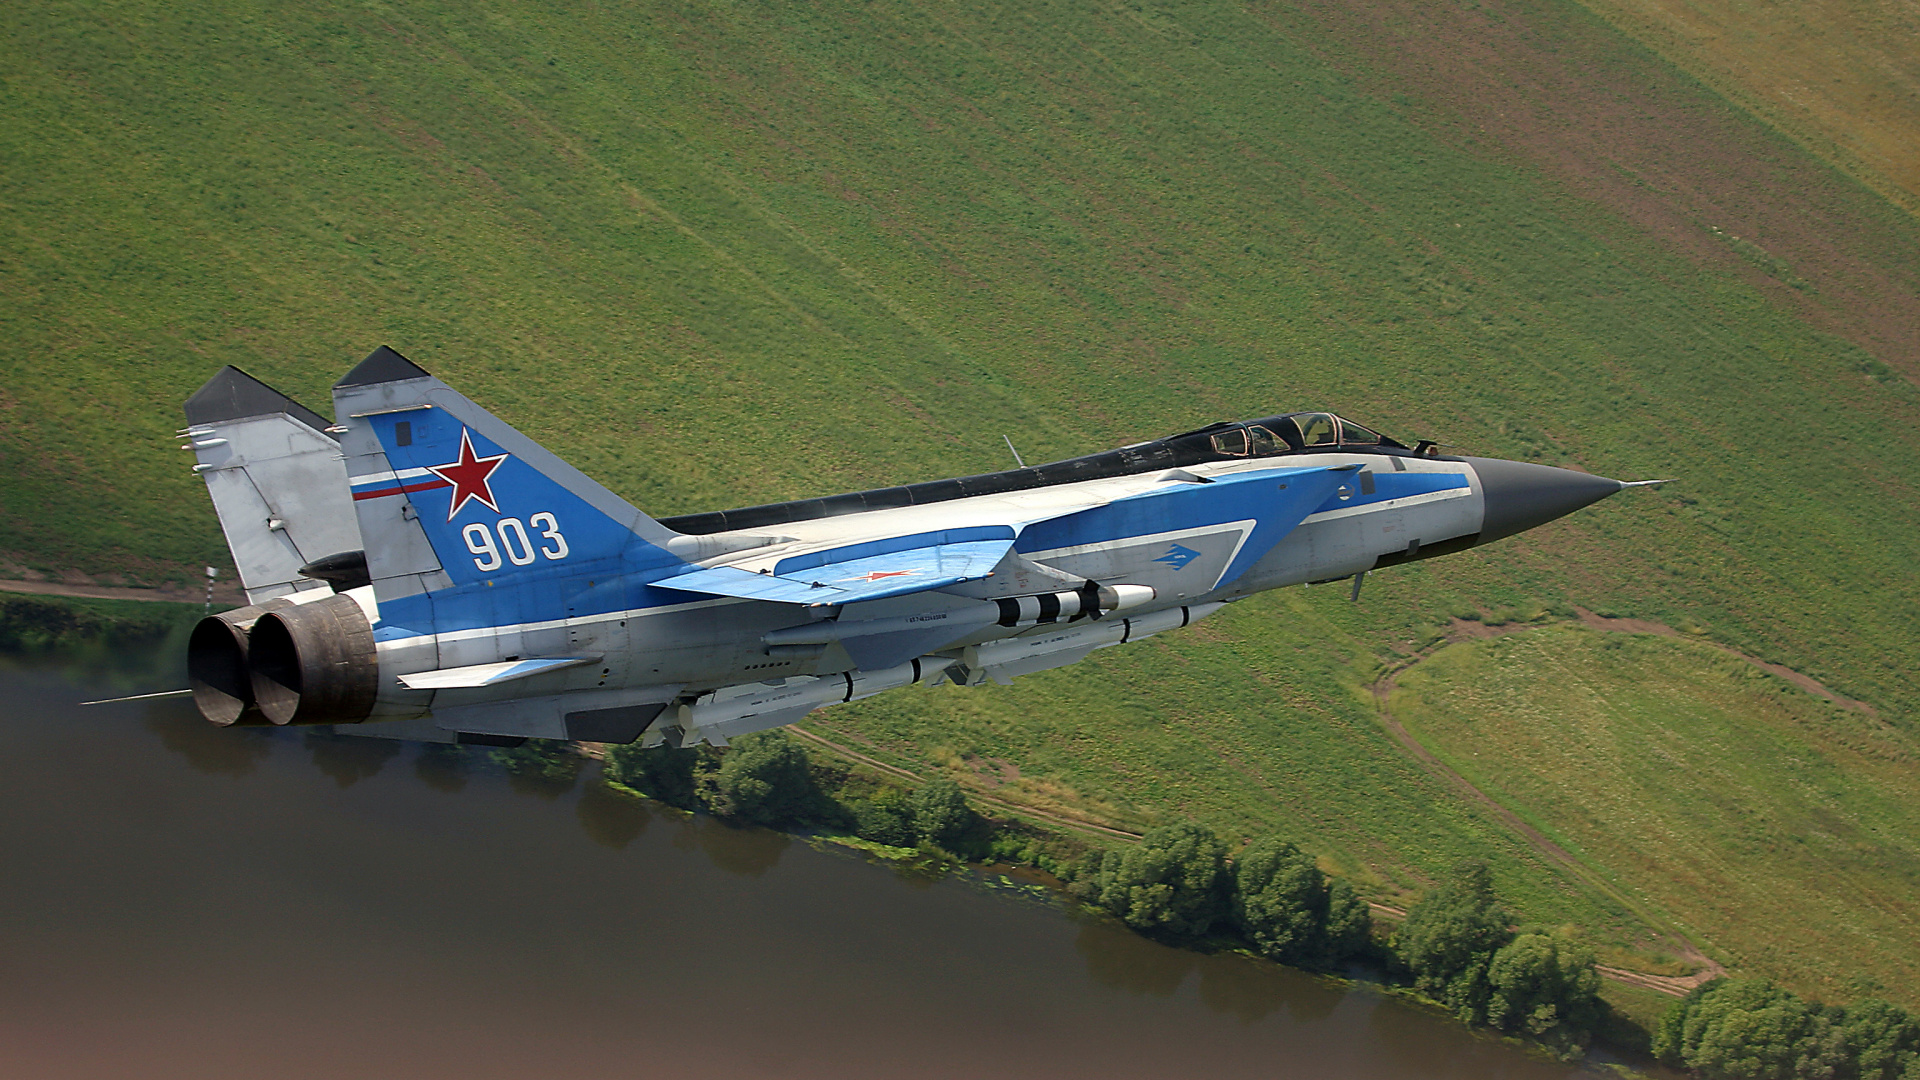 Blue and White Jet Plane Flying Over Green Grass Field During Daytime. Wallpaper in 1920x1080 Resolution